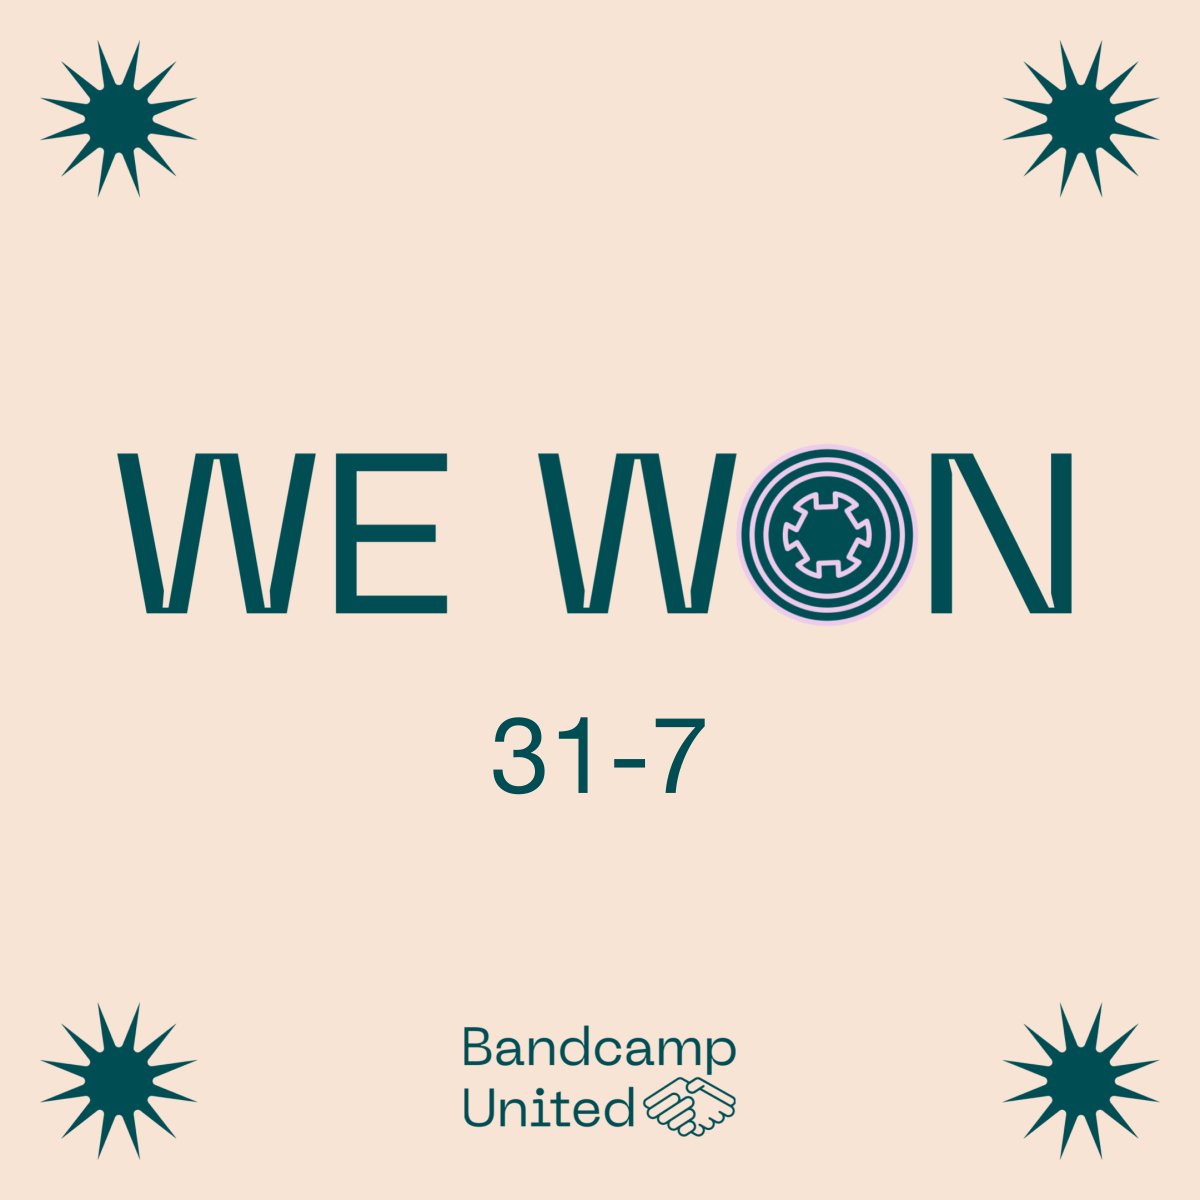 We at Bandcamp United are happy to announce that we’ve won our union, 31 to 7! We’re excited to work with leadership to build a better Bandcamp! Thank you all for your support throughout this process, and in the future.